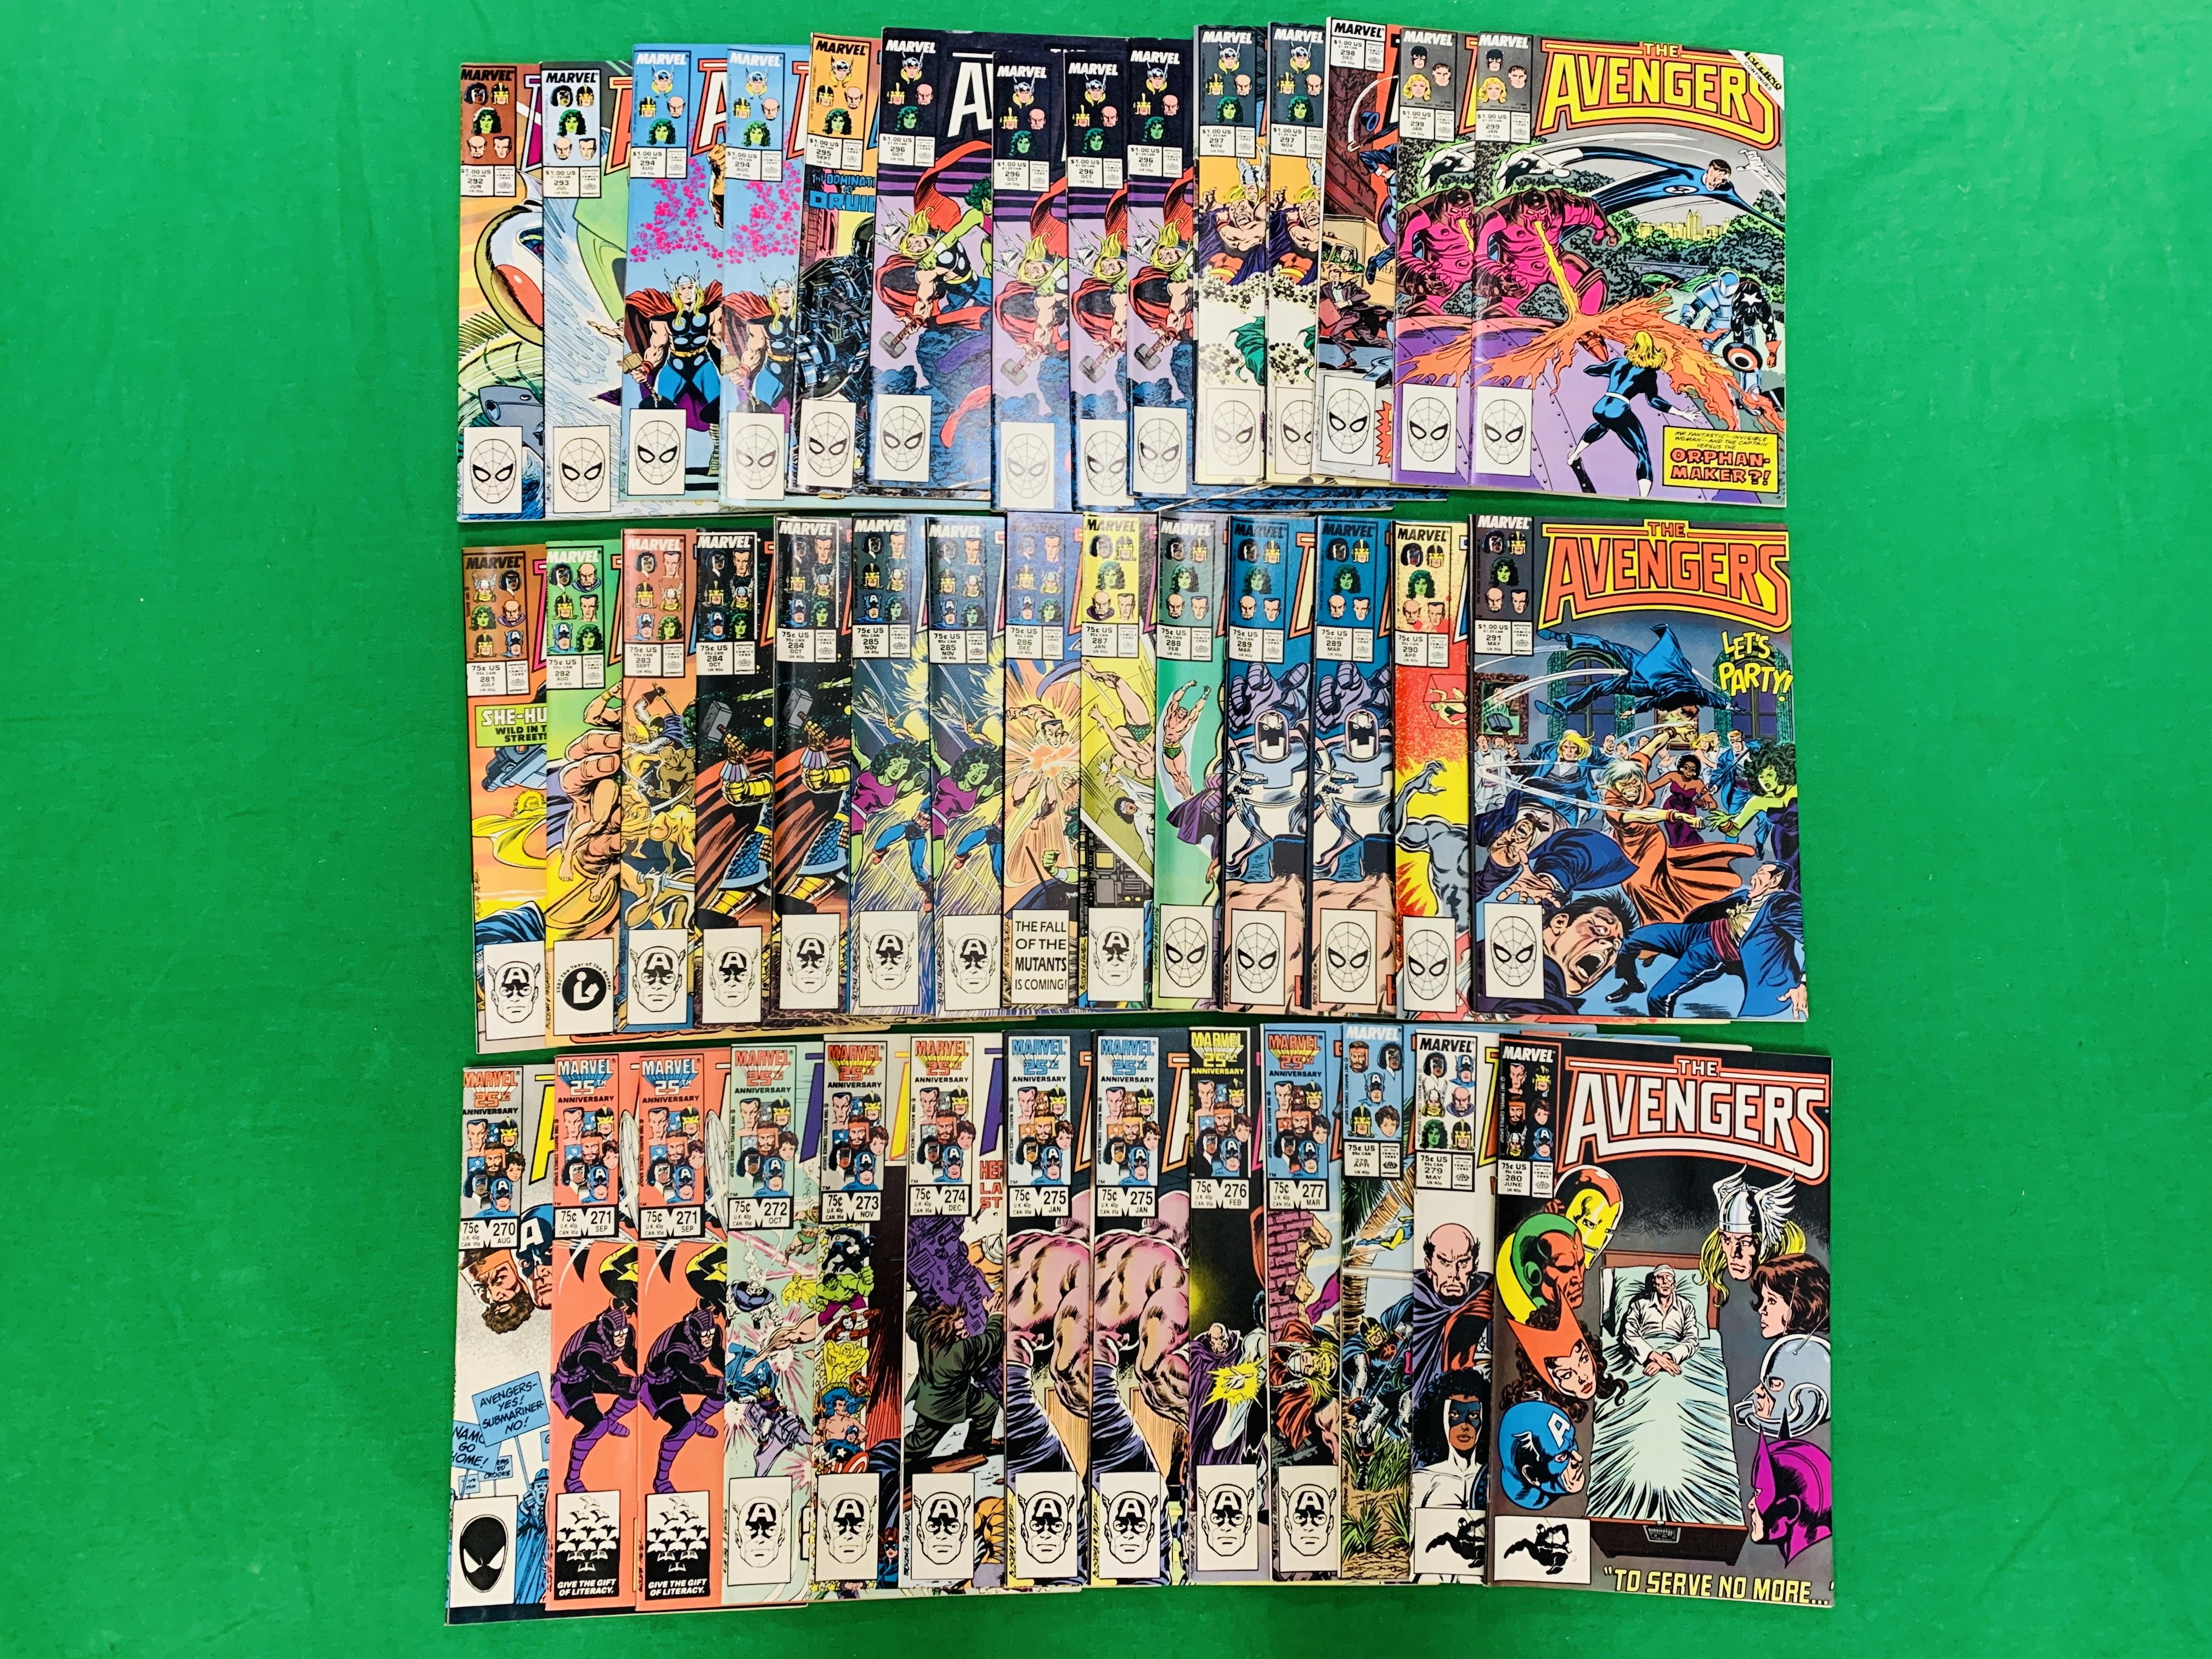 MARVEL COMICS THE AVENGERS NO. 101 - 299, MISSING ISSUES 103 AND 110. - Image 124 of 130